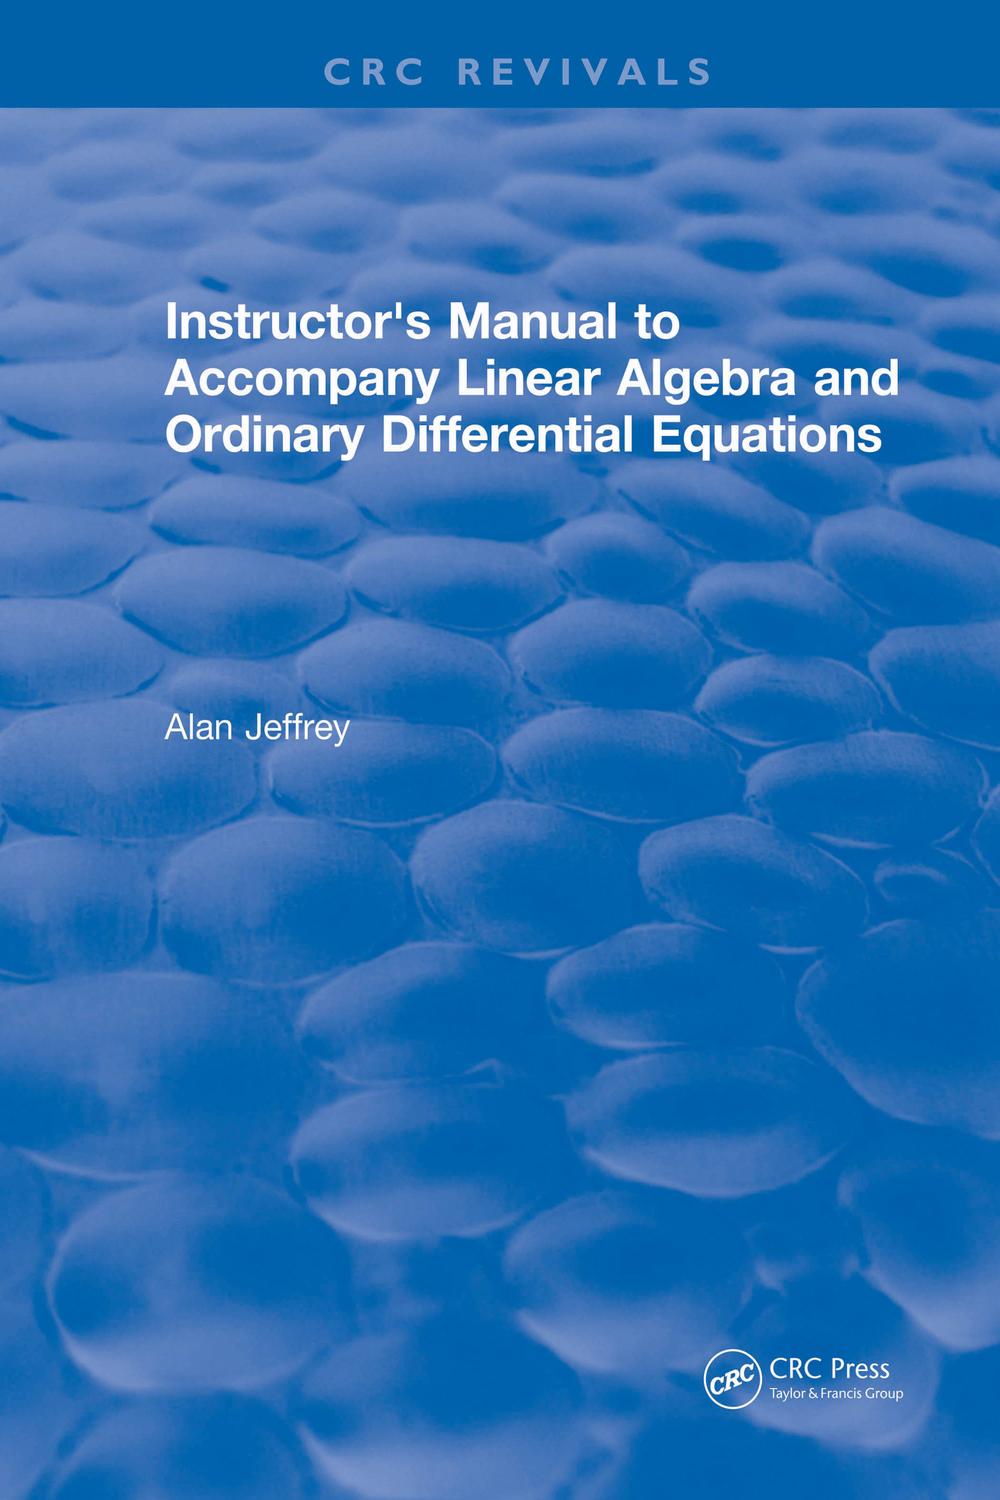 Instructors Manual to Accompany Linear Algebra and Ordinary Differential Equations - Alan Jeffrey